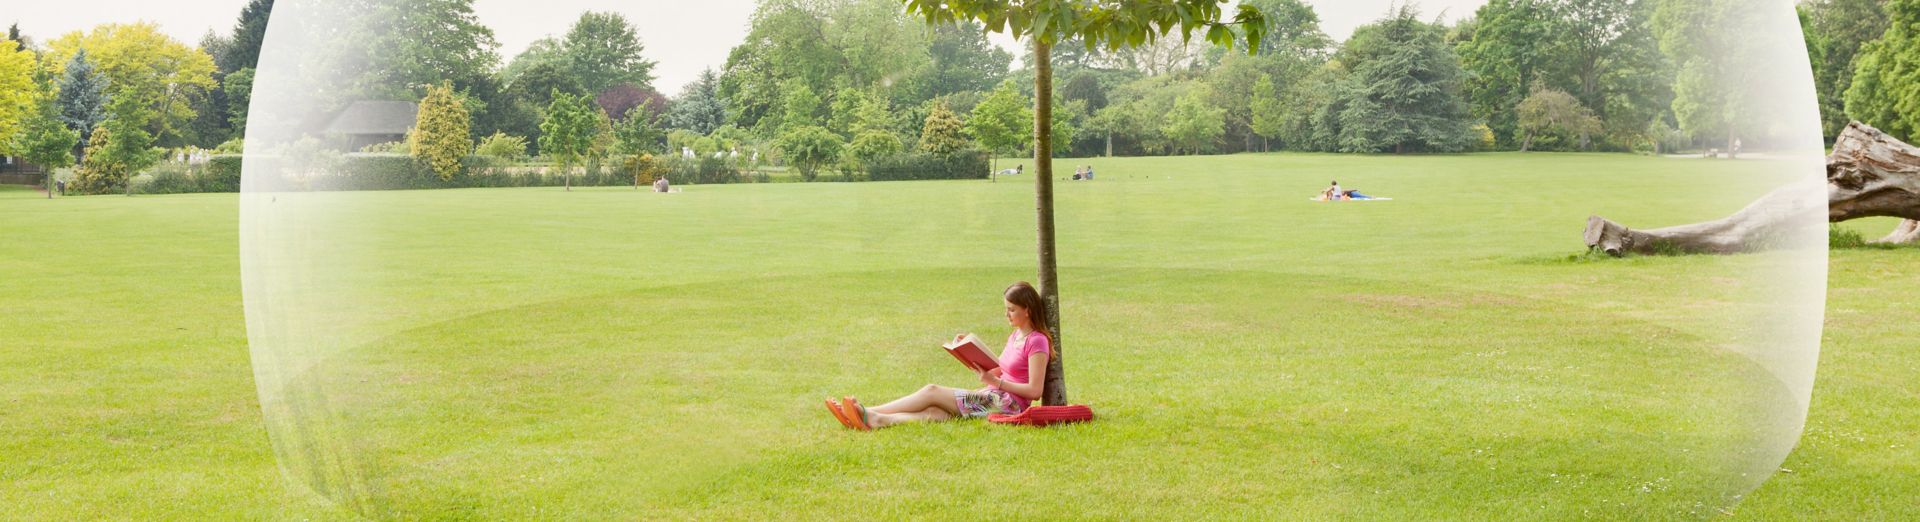 Person sitting under tree, bubble around her